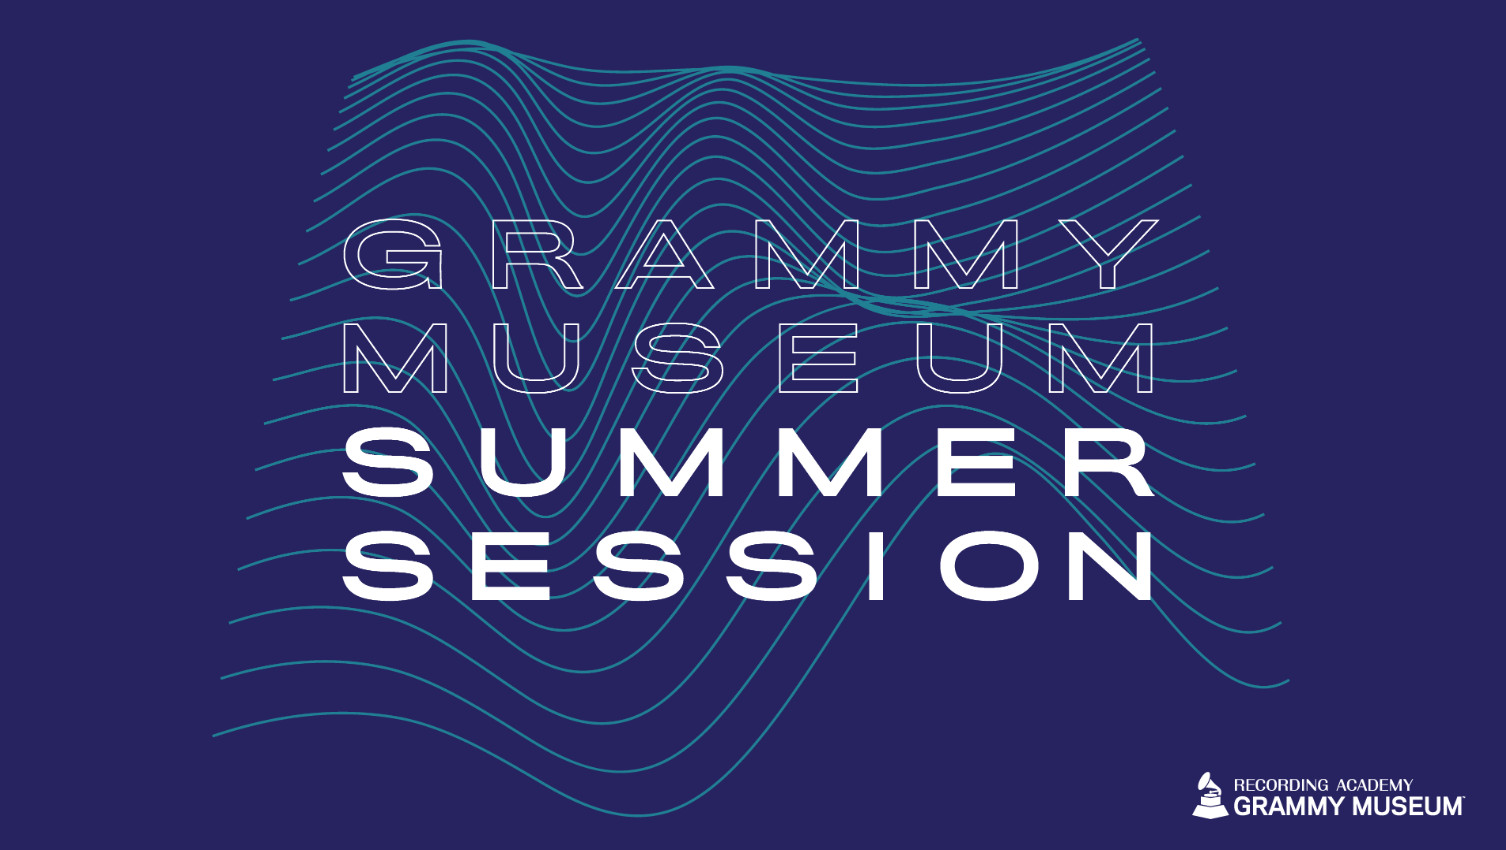 Grammy museum announces new york city program series presented by city national bank